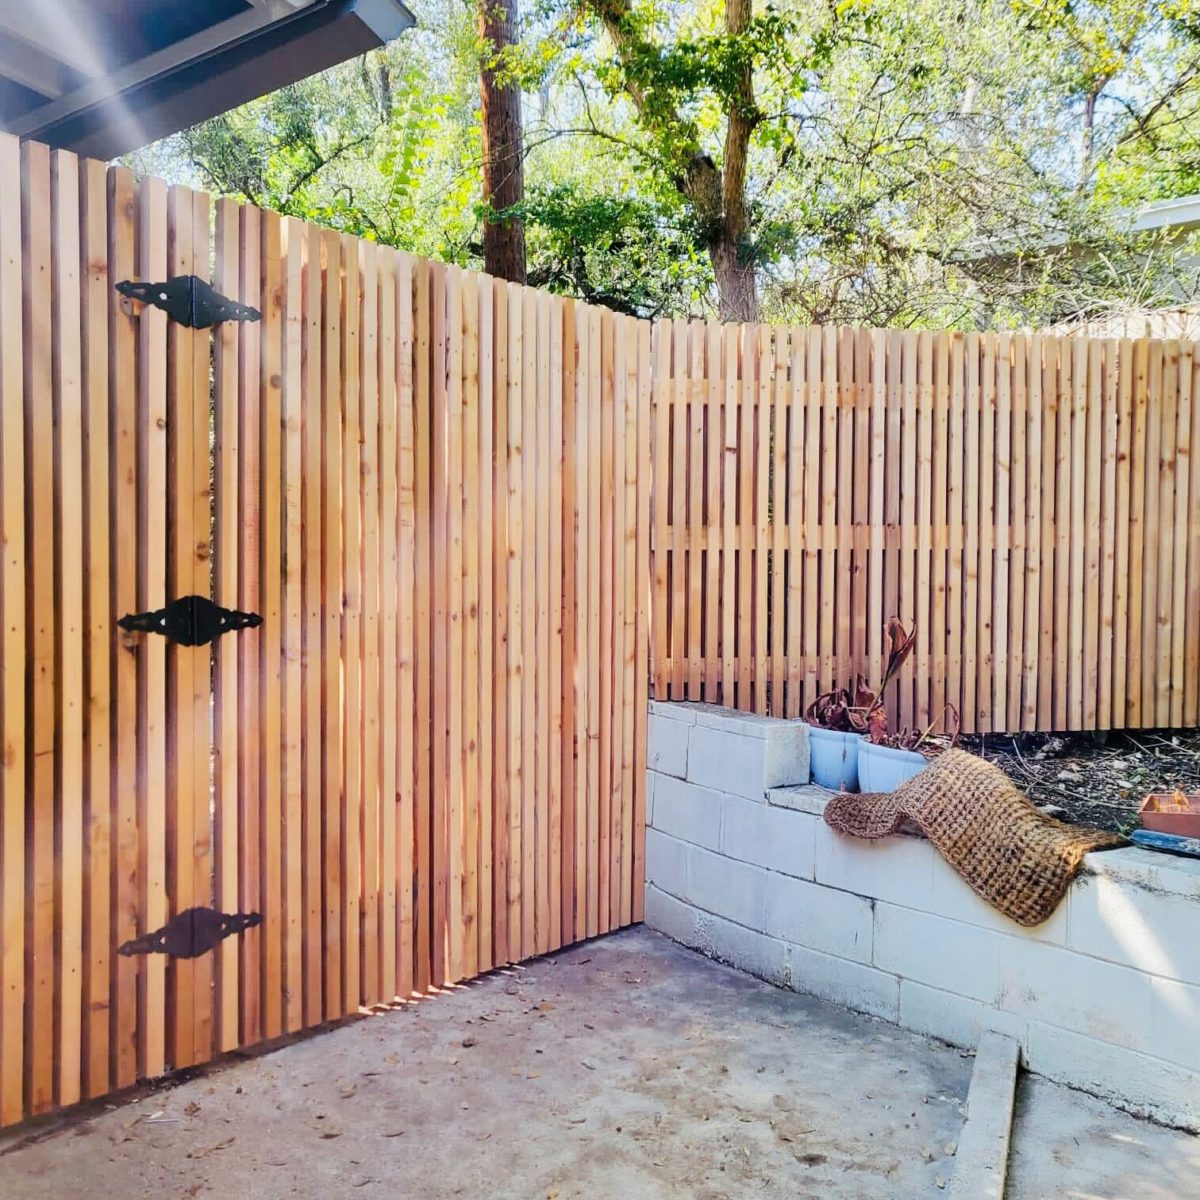 Slim red cedar wood slats enclosing a two level cemented backyard, a part of the slim wood slats are also a gate with black hinges